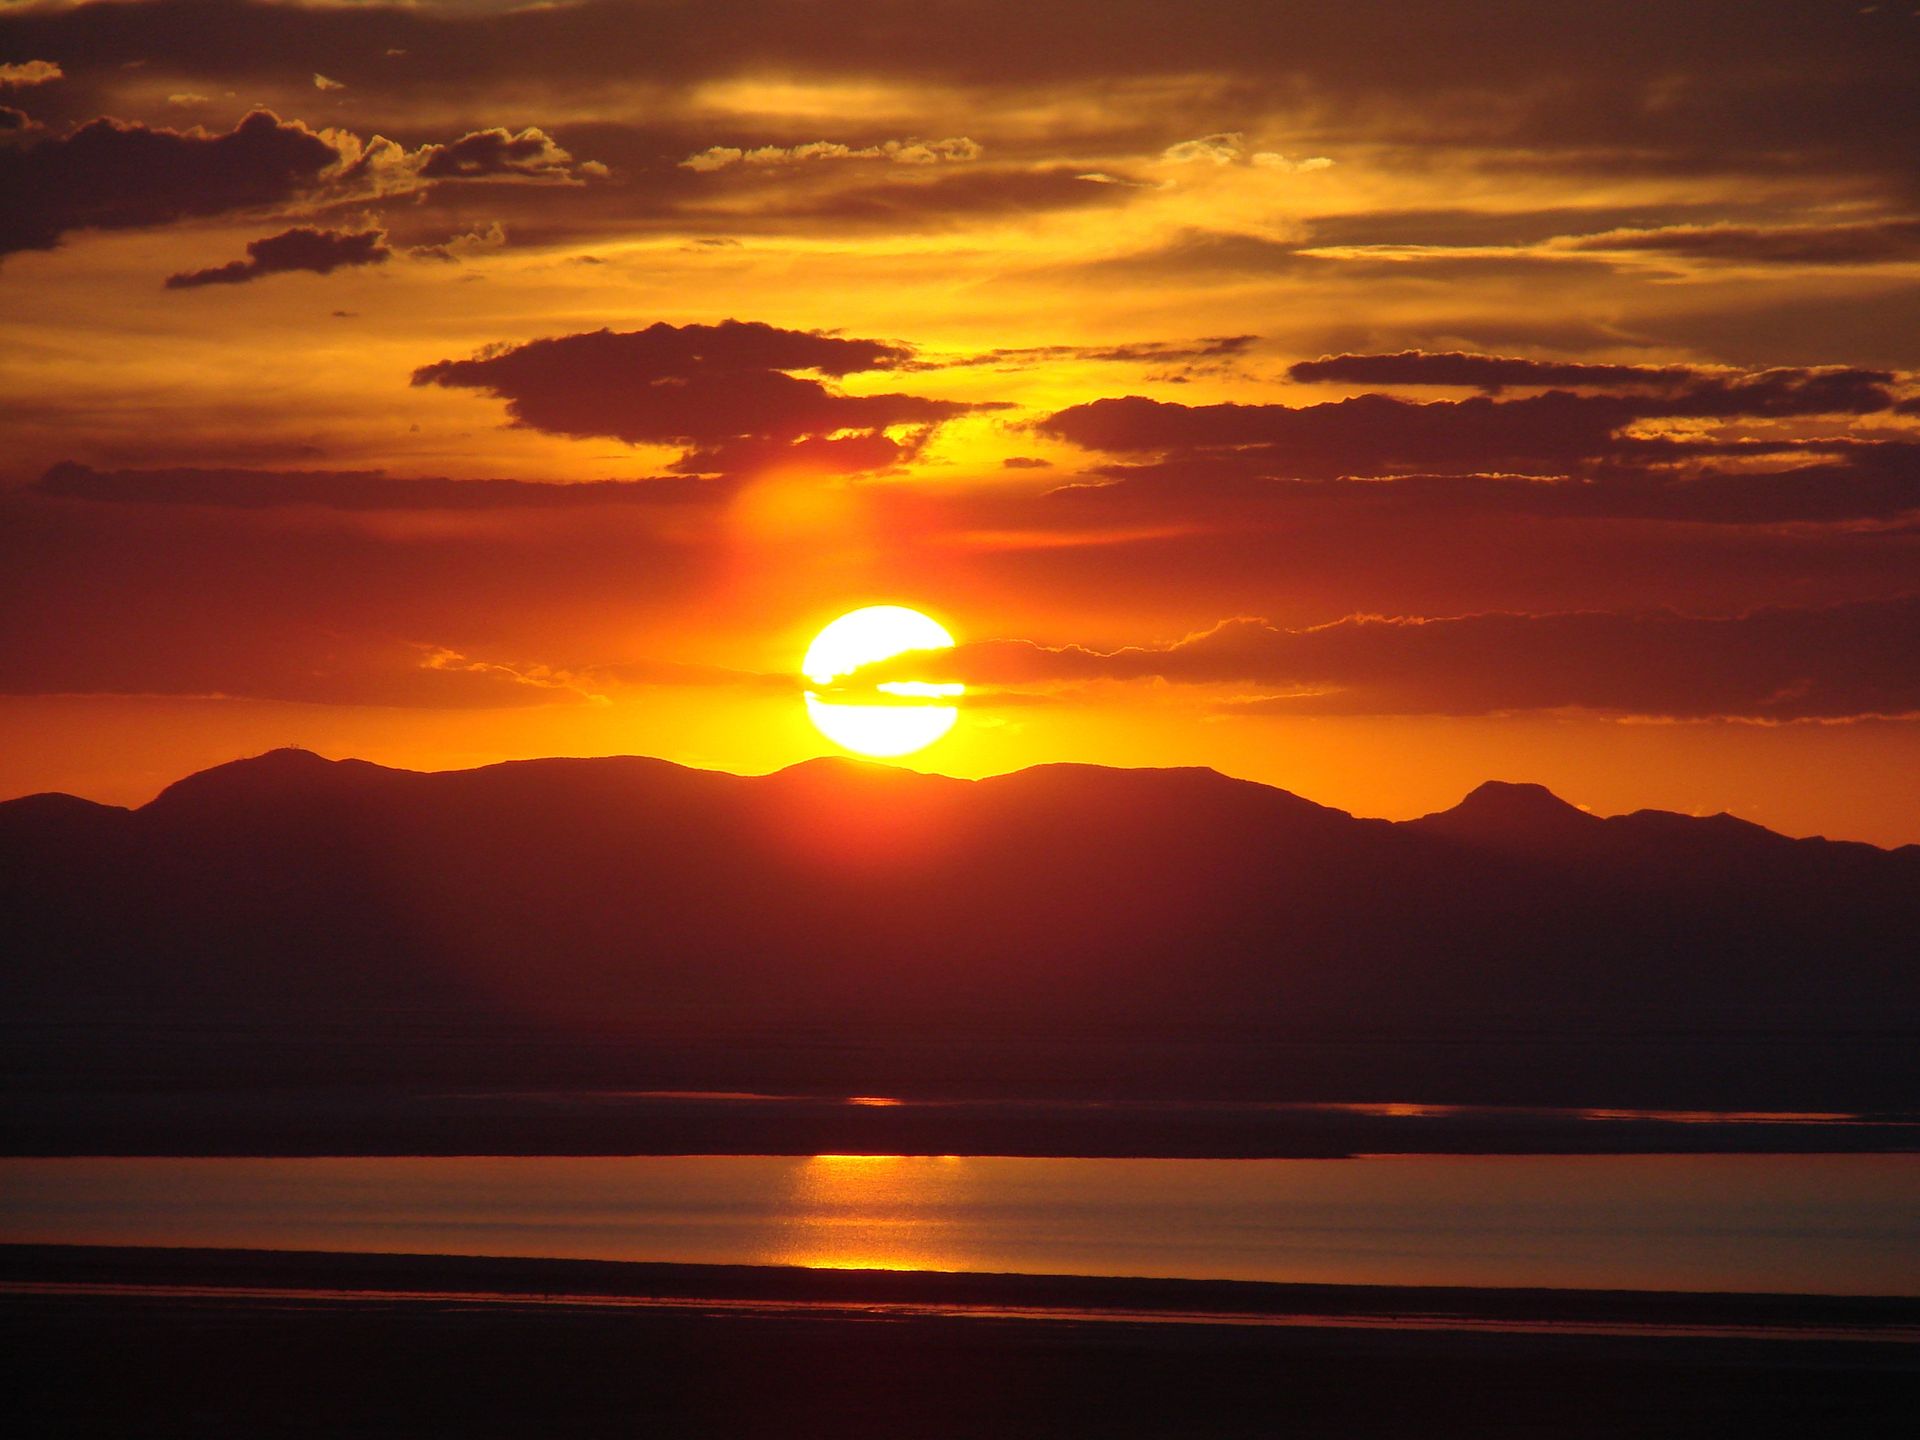 The sun sets behind mountains and the Great Salt Lake.